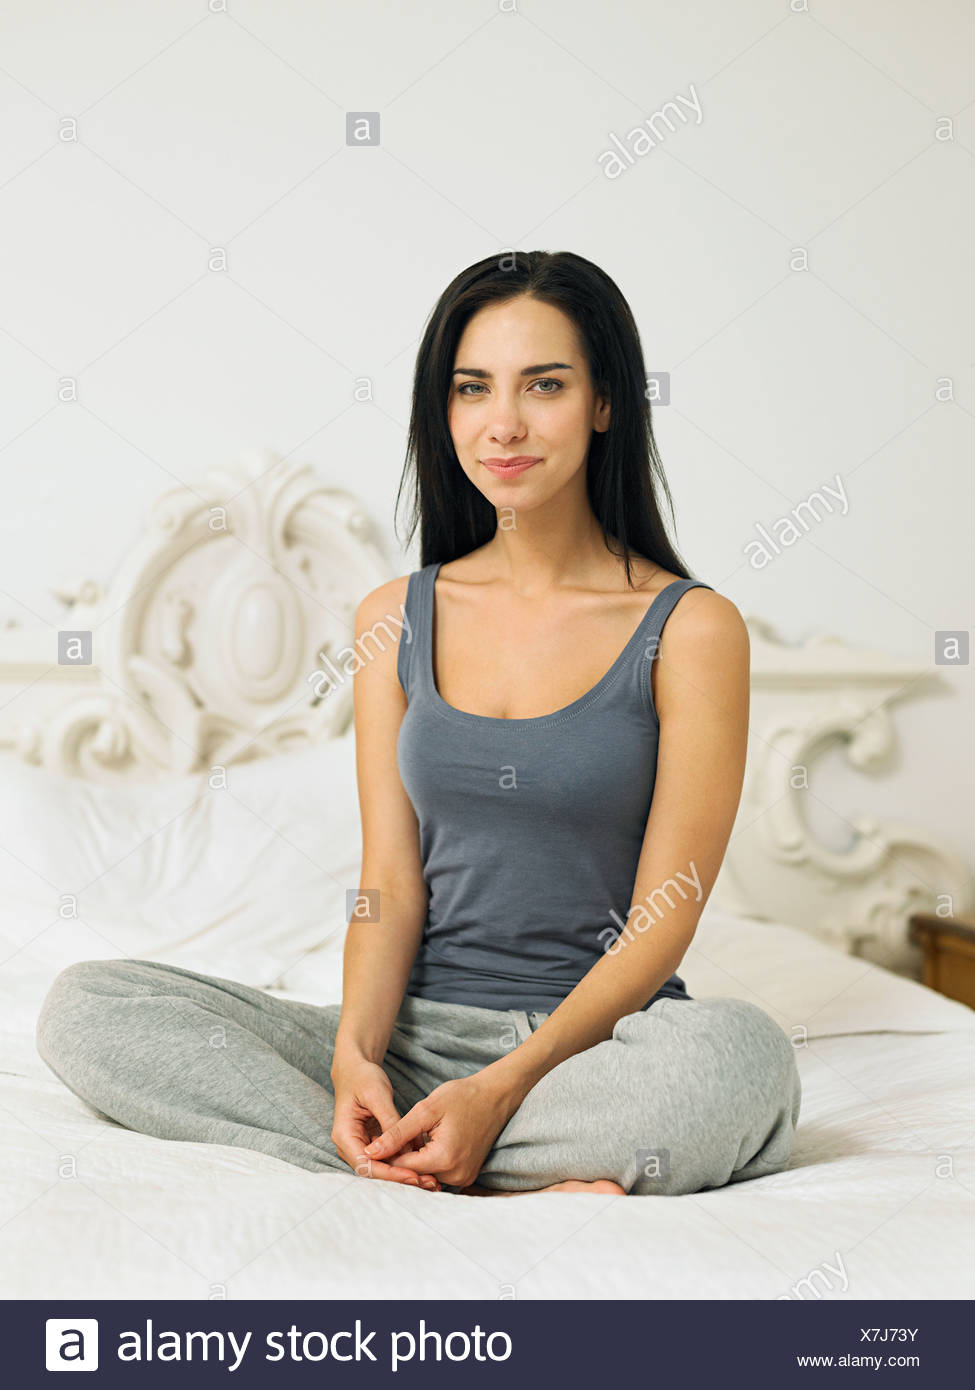 Young woman sitting cross legged on bed, portrait Stock Photo ...